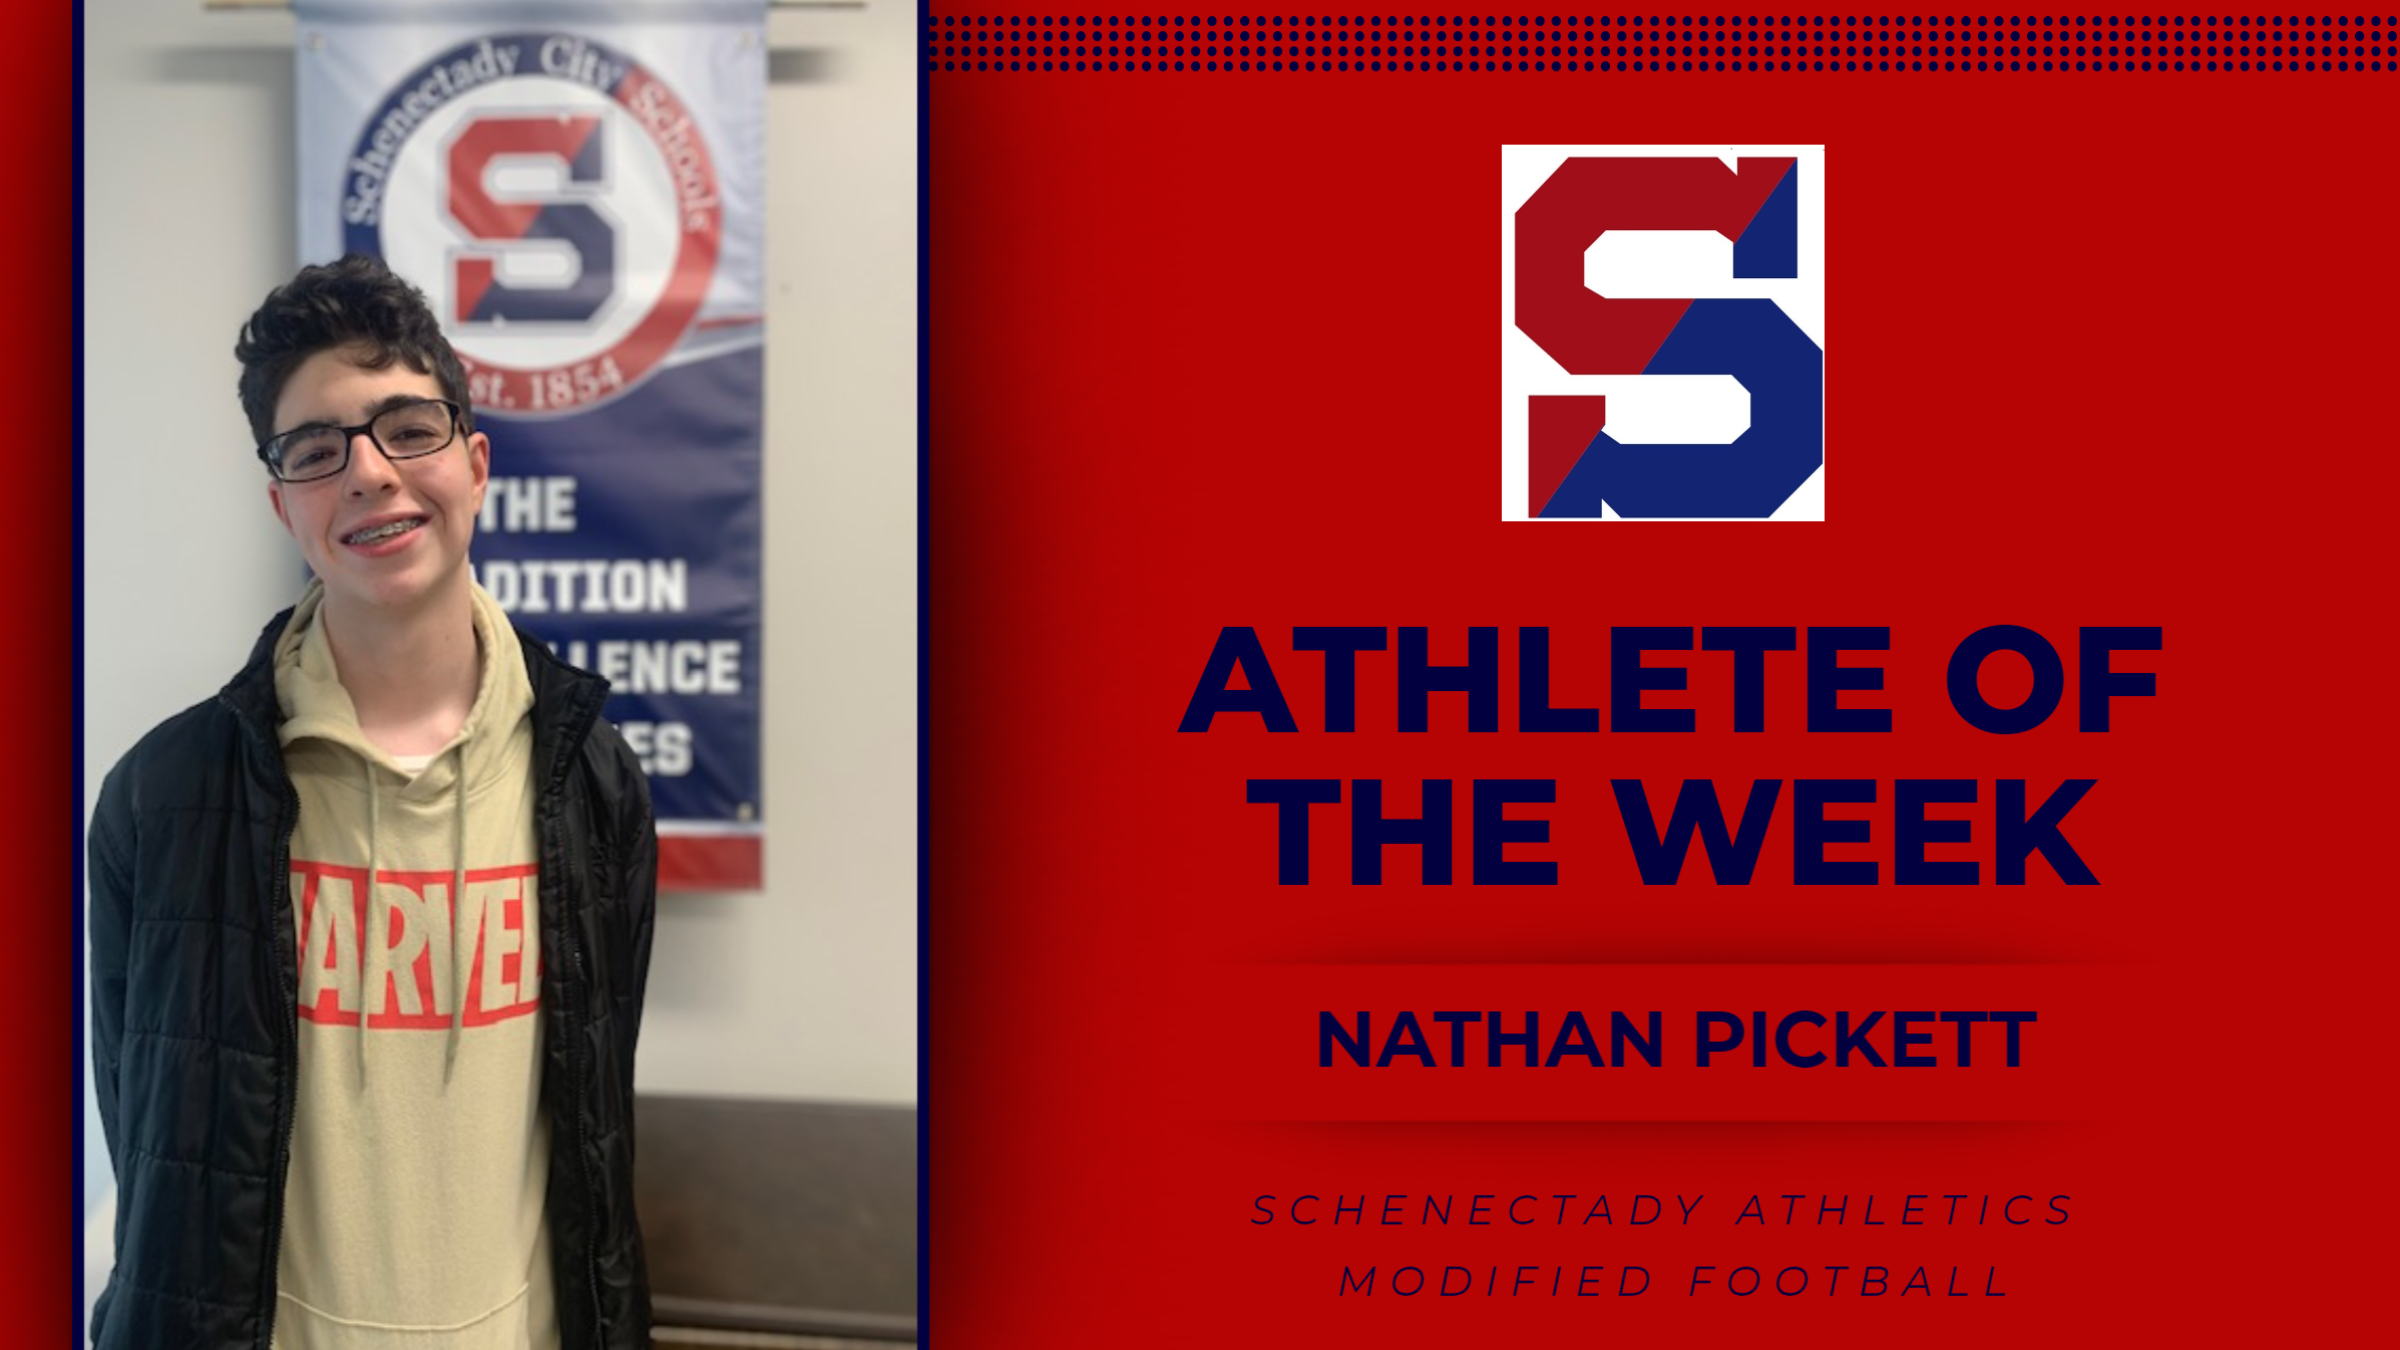 Nathan Pickett, Athlete of the Week